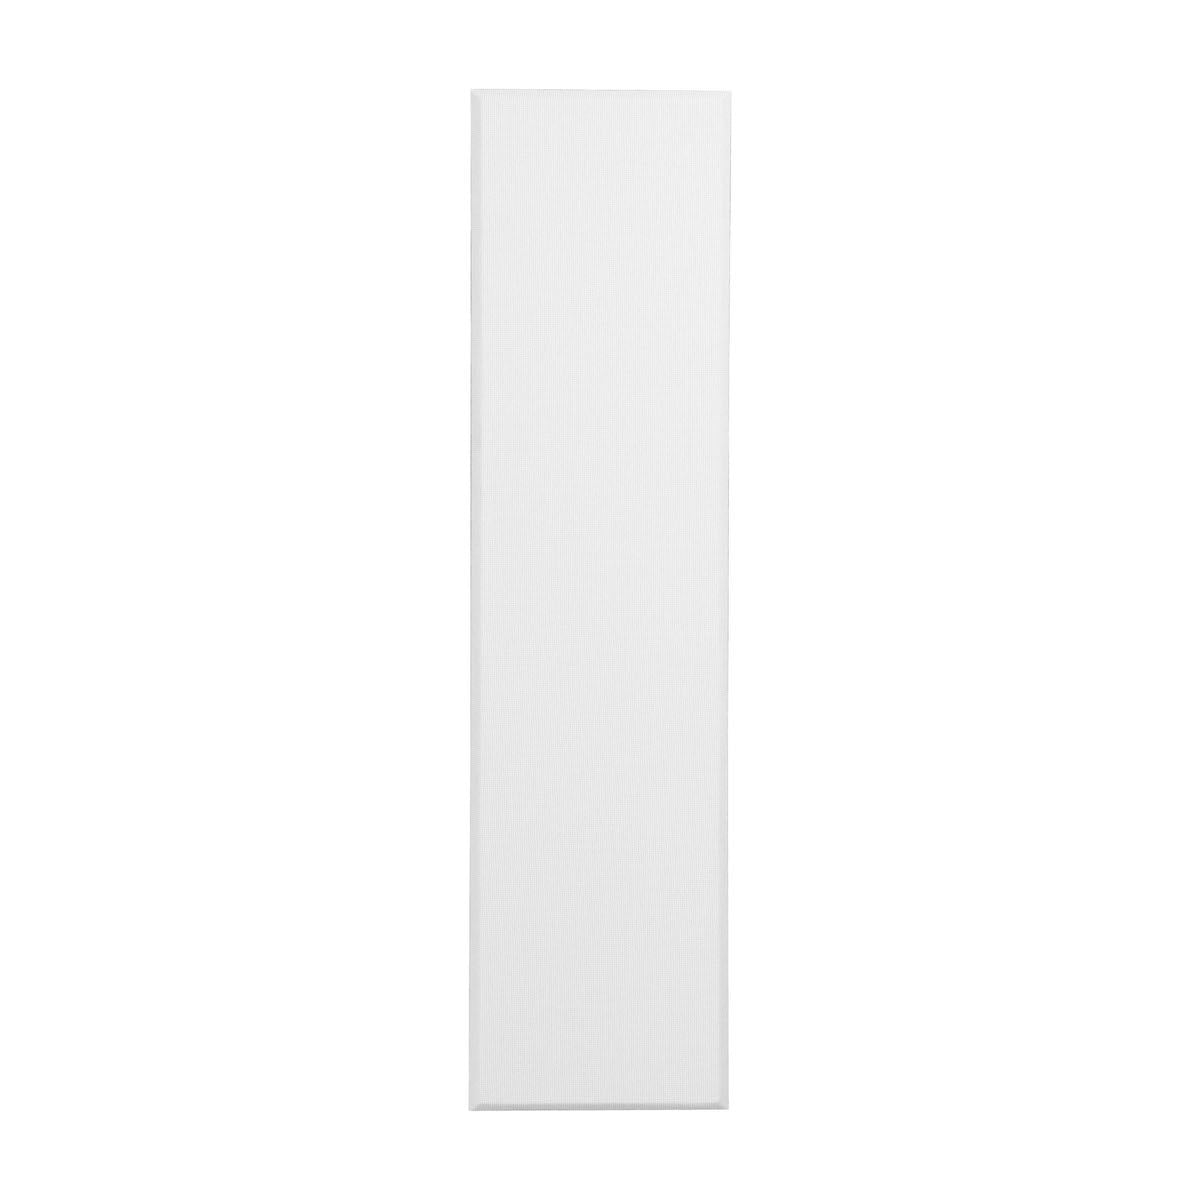 Primacoustic Broadway Wall Panels - Control Columns, Paintable